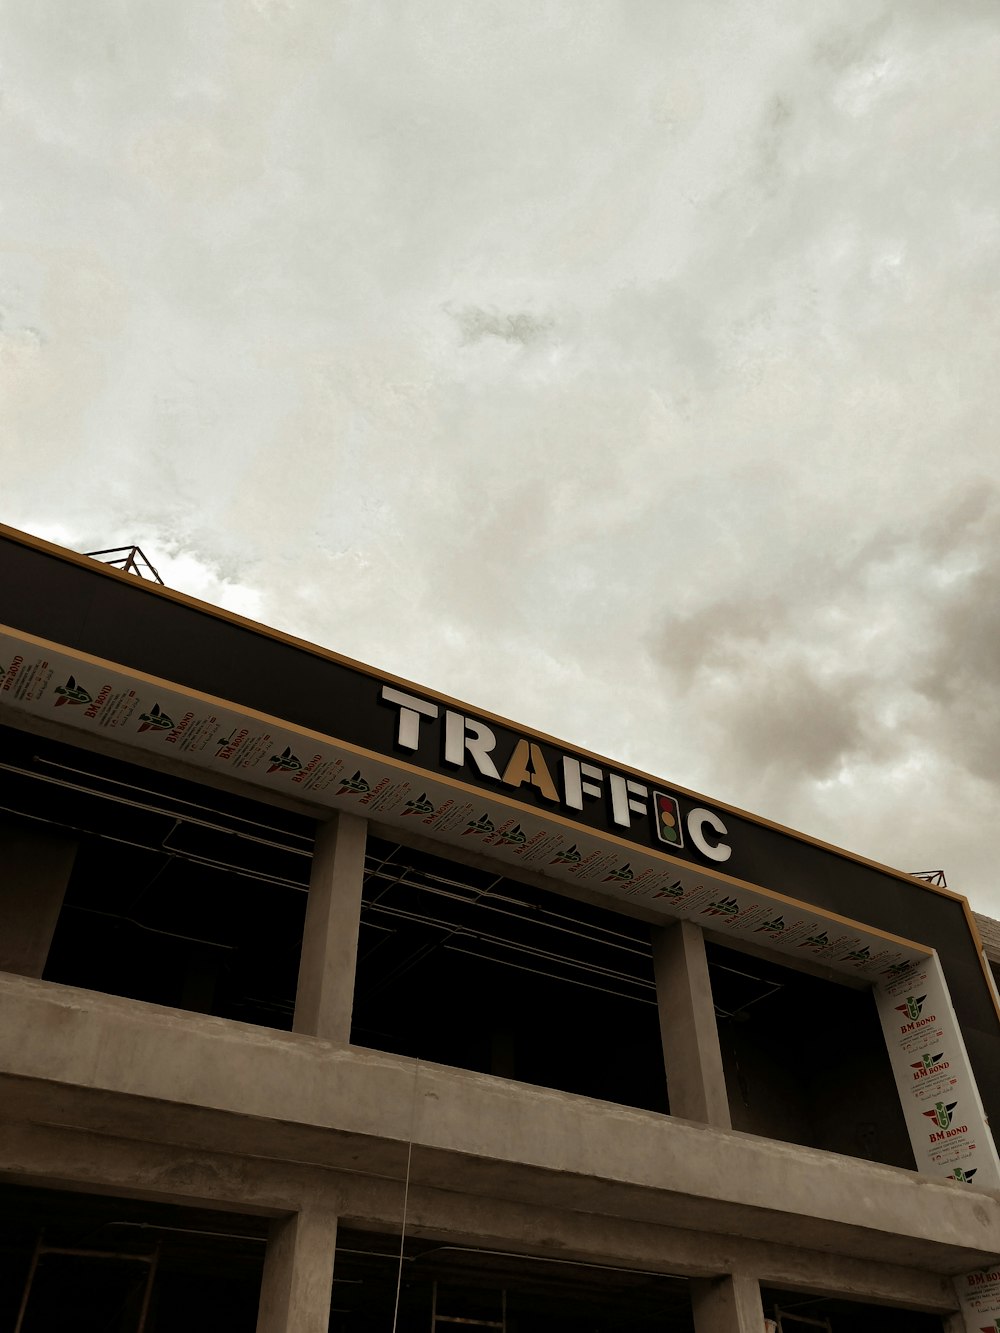 a traffic sign on top of a building under a cloudy sky